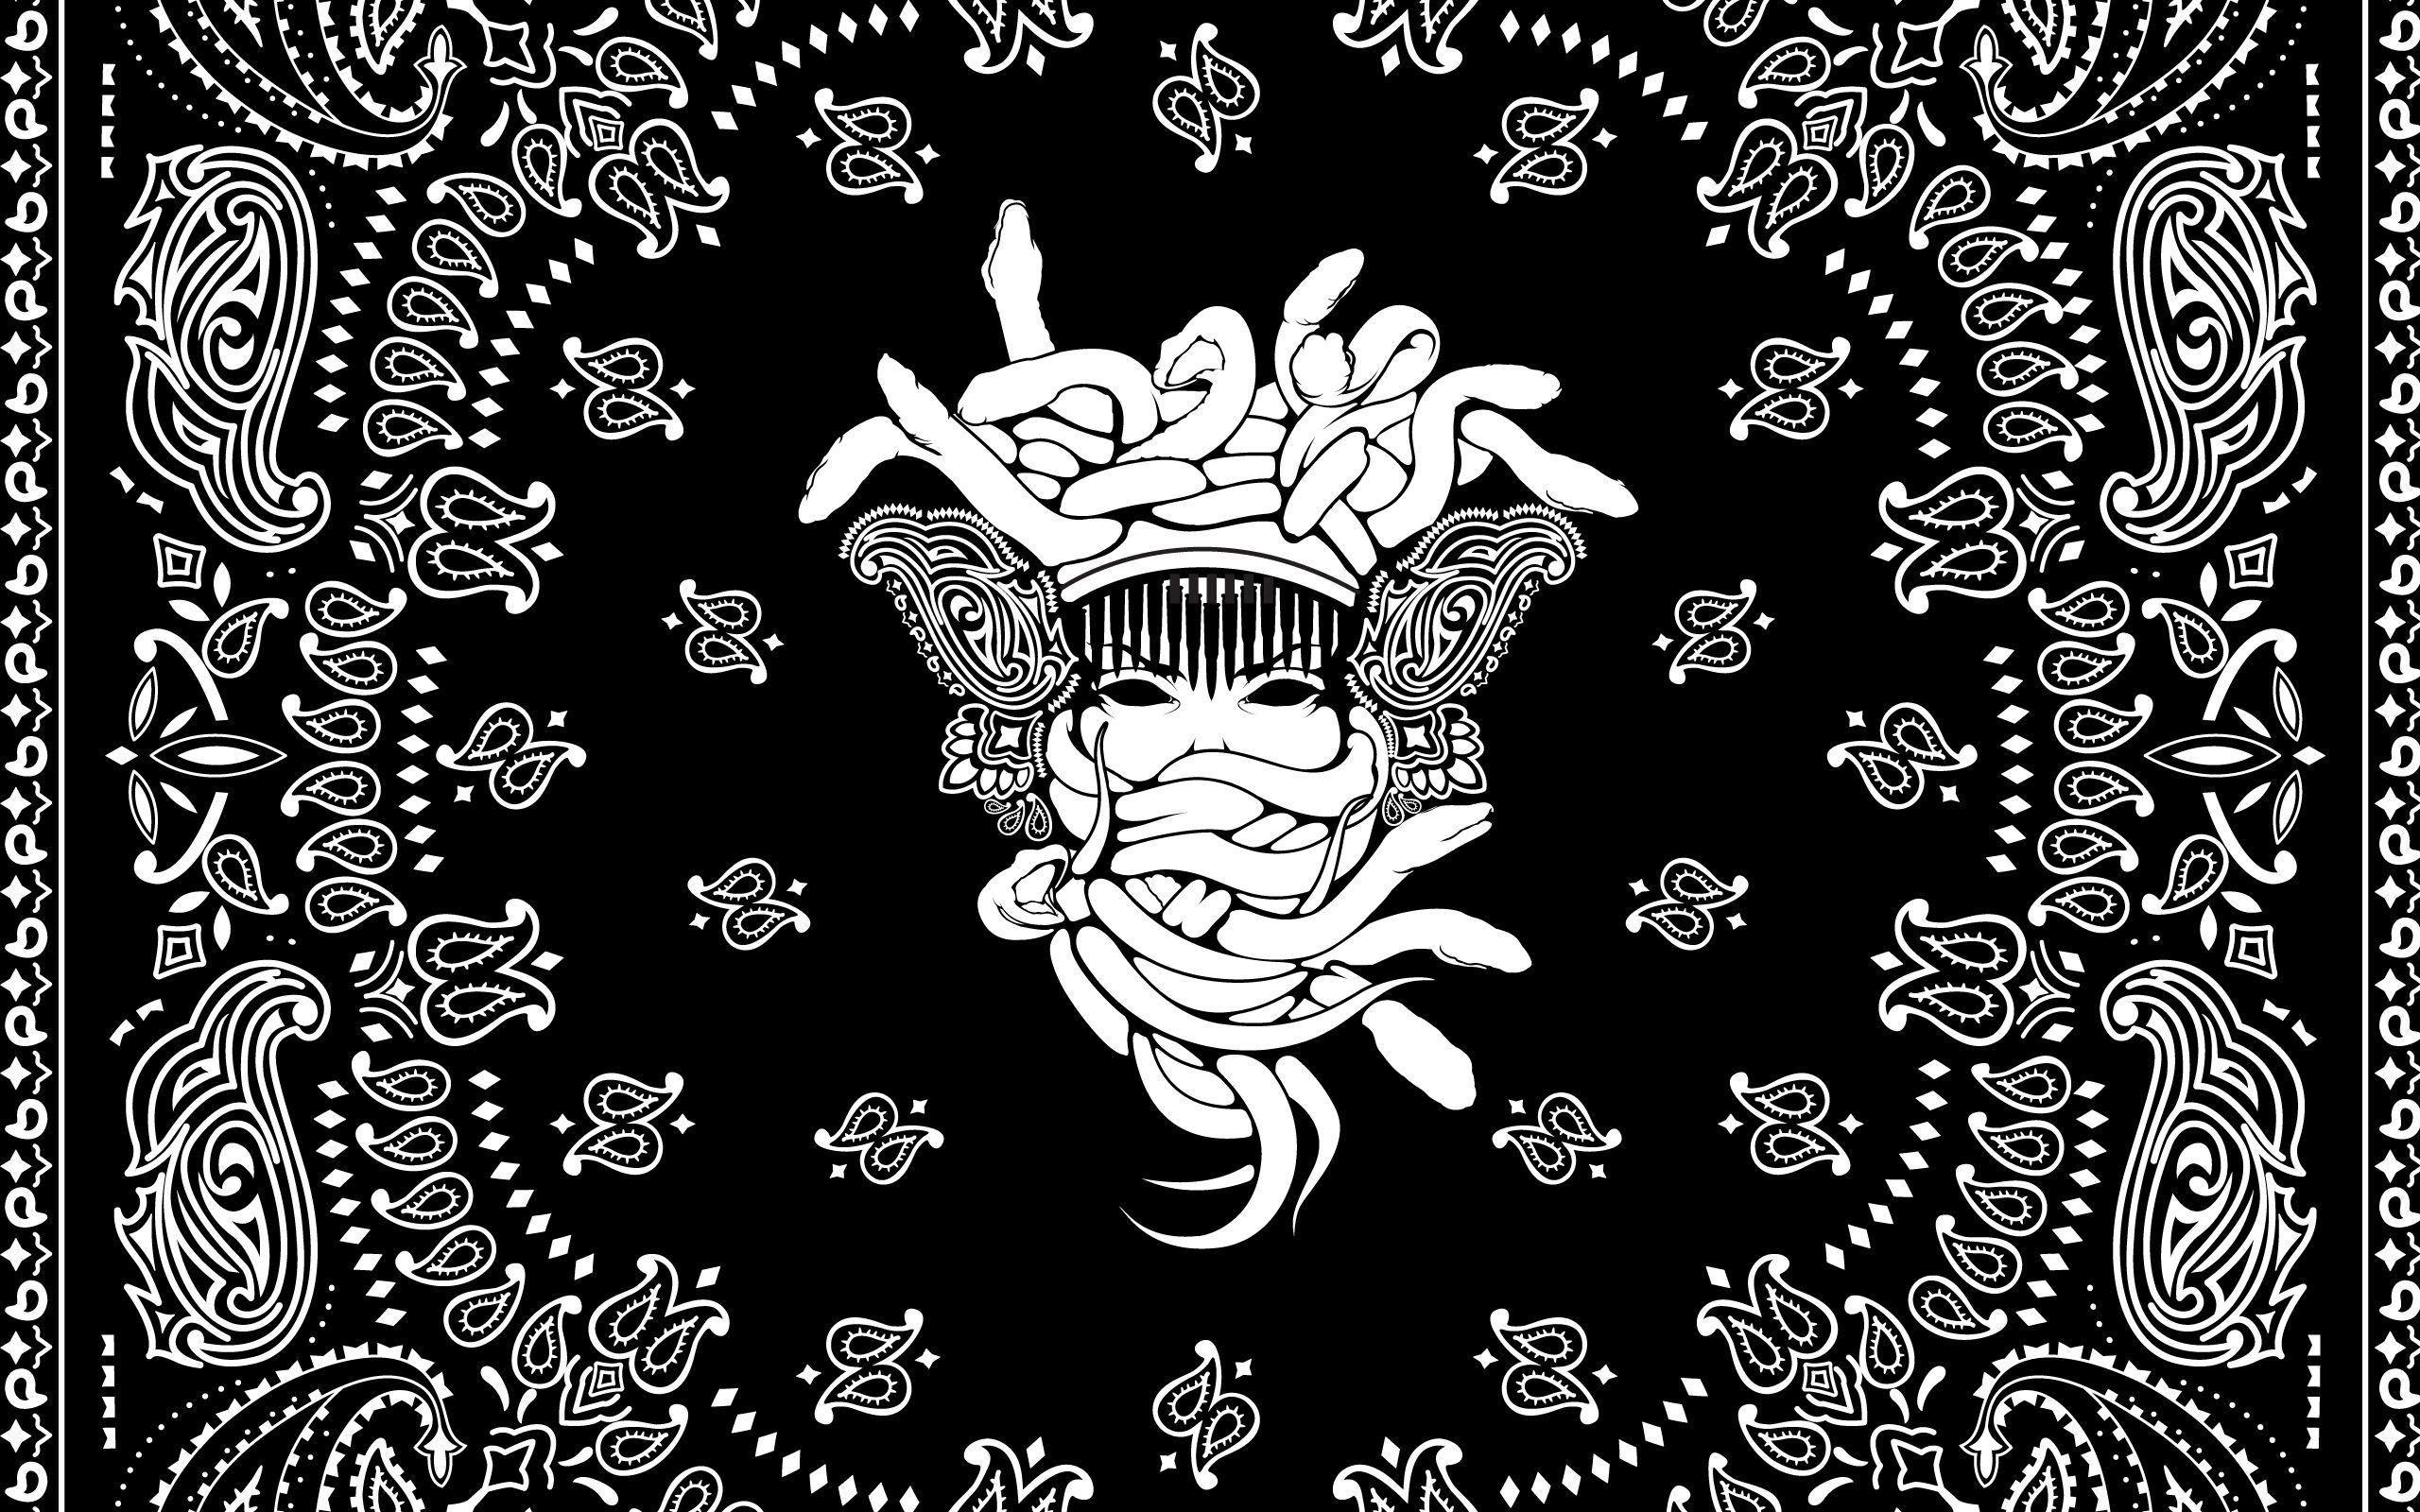 New Crooks and Castles Logo - Crooks and Castles Wallpaper - WallpaperSafari